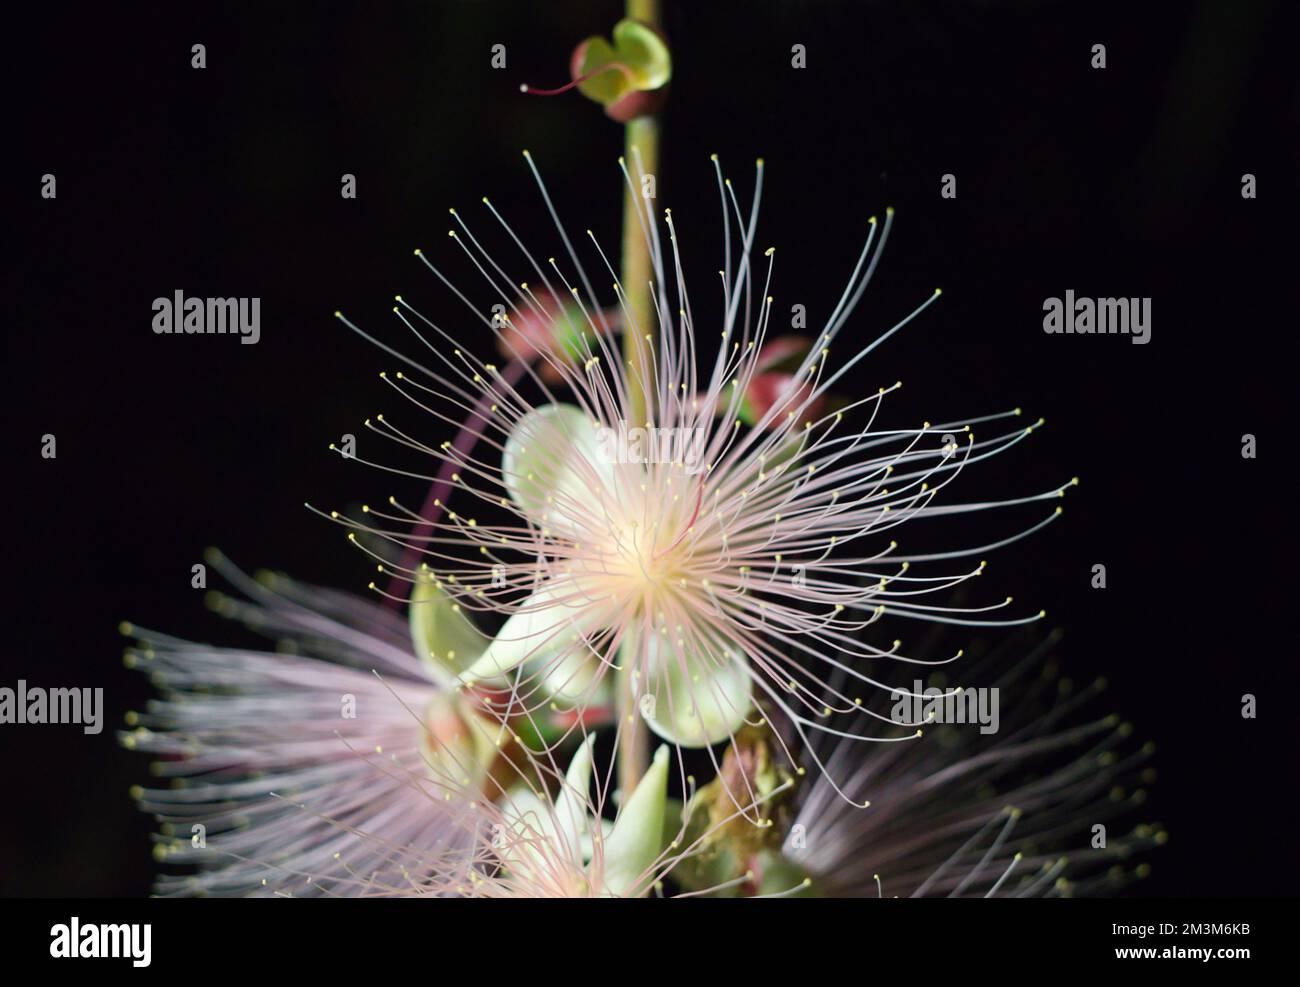 Barringtonia racemosa or powder puff tree flower at night. Pink exotic flowers. Strings of flowers hang from the trees like fireworks. Yilan, Taiwan. Stock Photo